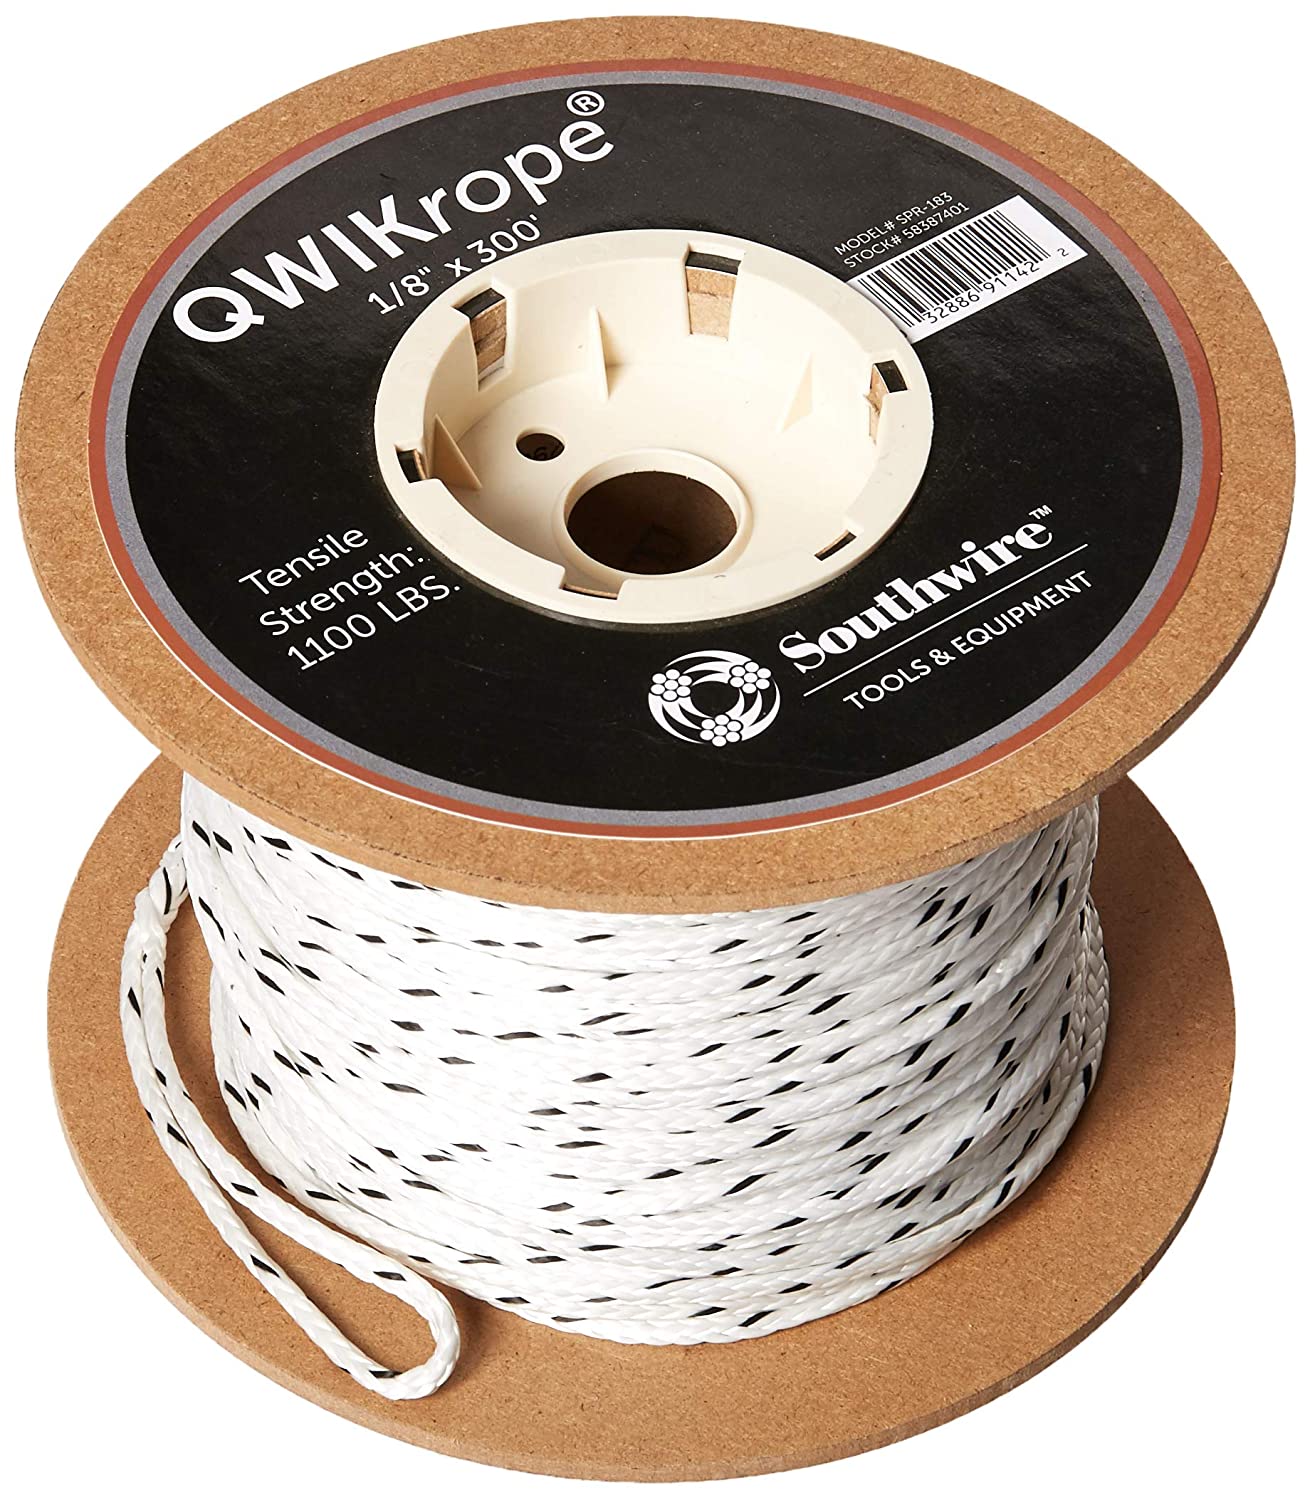 Southwire QWIKrope 12 Strand Rope 1/8in x 300' - SPR-183